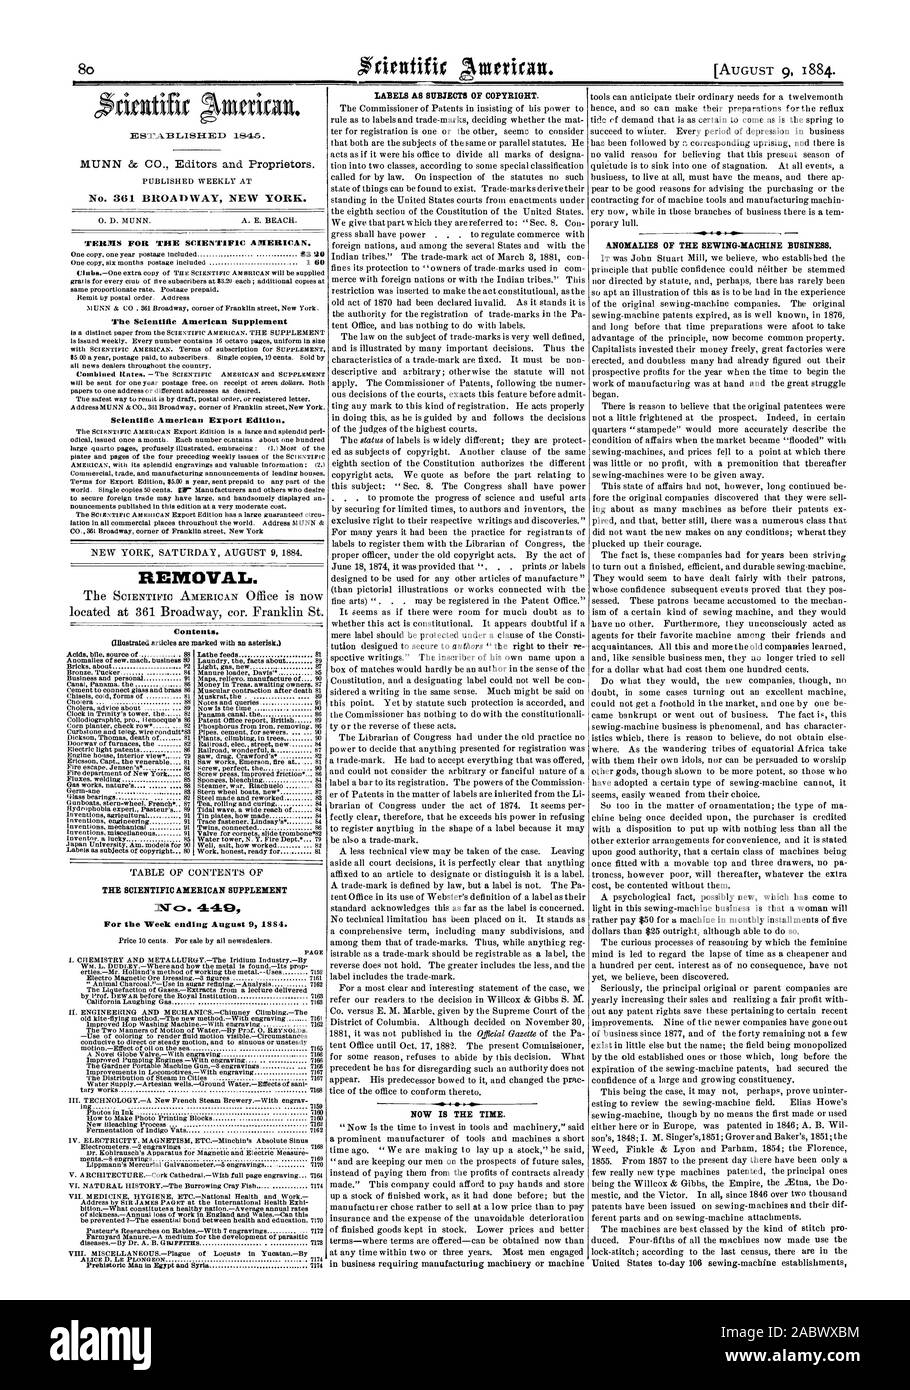 No. 361 BROADWAY NEW YORK. 0. D. MUNN. A. E. BEACH. TERMS FOR THE SCIENTIFIC AMERICAN. l'be Scientific American Supplement Scientific. American Export Edition. REMOVAL. Contents. THE SCIENTIFIC AMERICAN SUPPLEMENT N. 449 For the Week ending August 9 1884. LABELS AS SUBJECTS OF COPYRIGHT. NOW IS THE TIME. ANOMALIES OF THE SEWING-MACHINE BUSINESS., 1884-08-09 Stock Photo